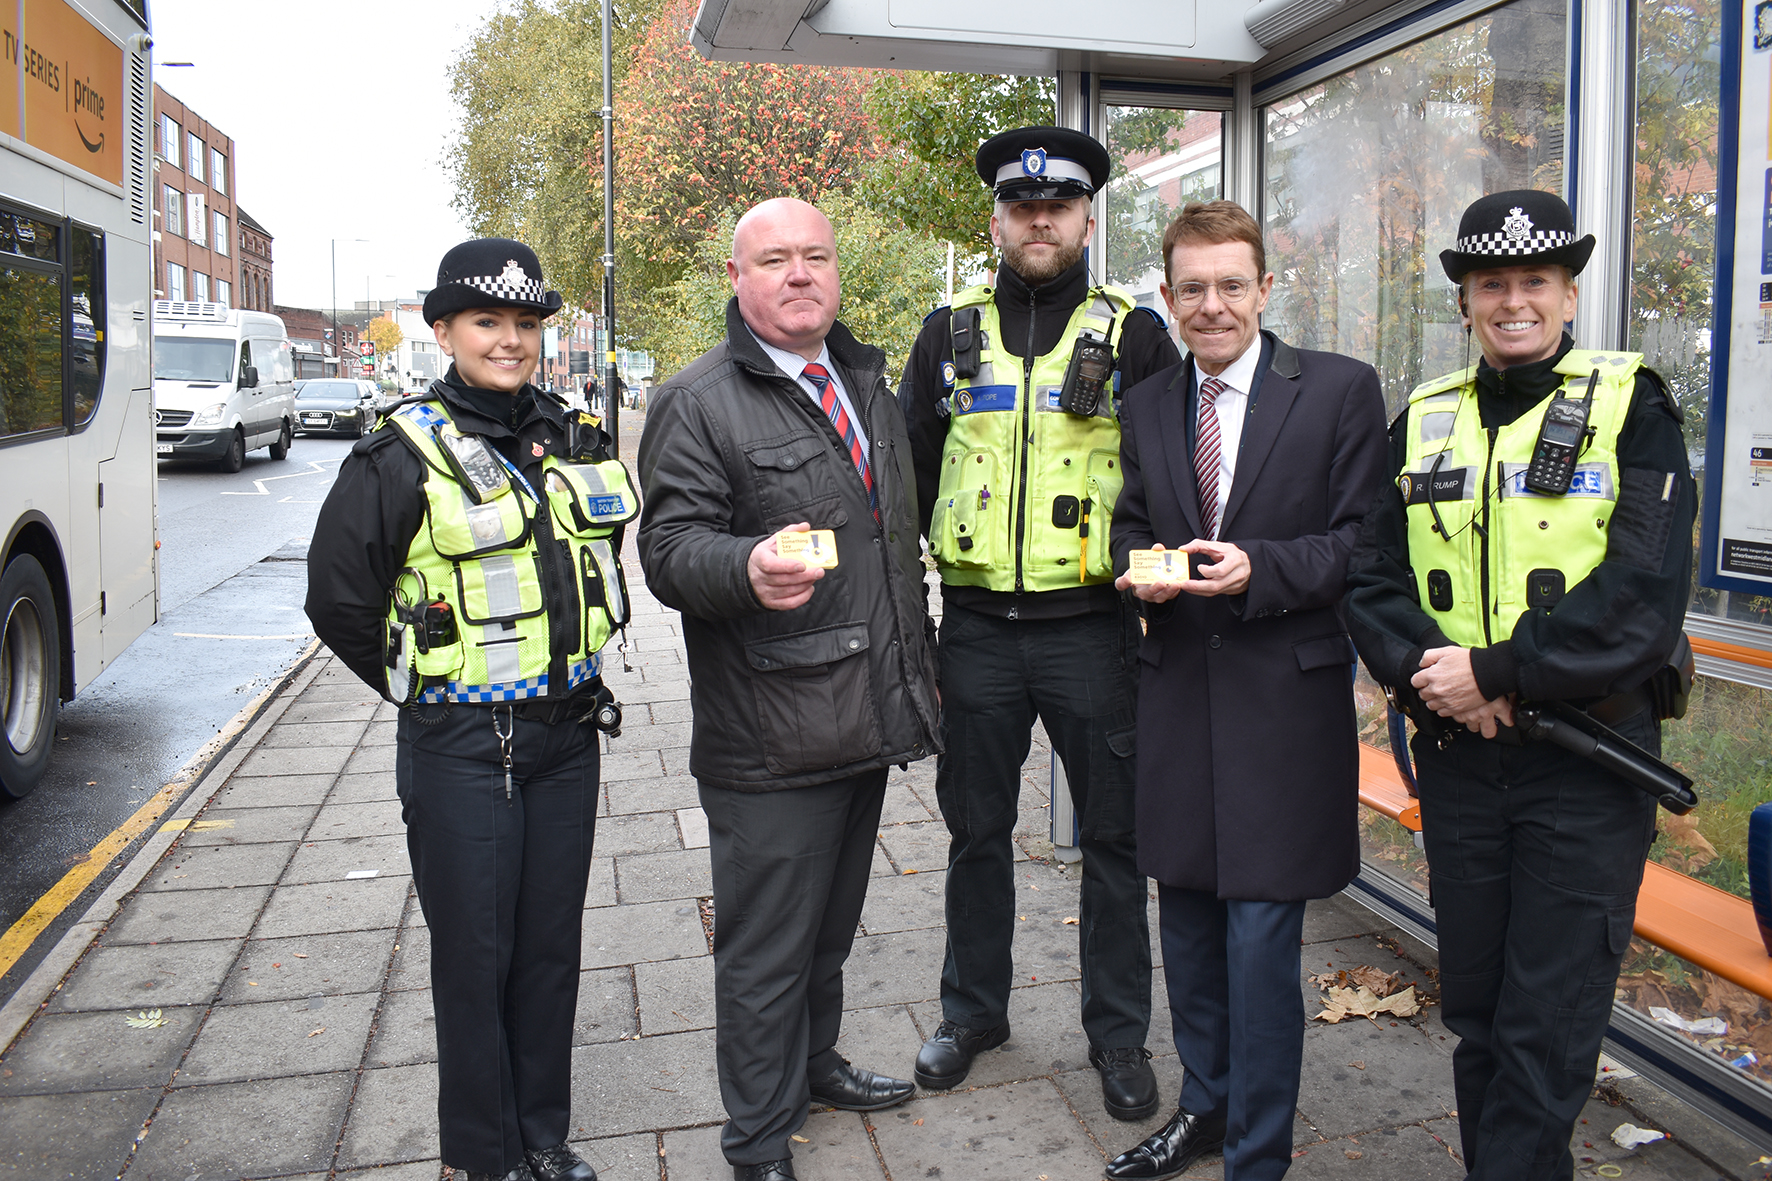 (l-r) Sgt. Nicola Mallaber of the Safer Travel Team, Tony Dallison, National Express’ head of security UK bus and coach, PCSO Andy Pope of the Safer Travel Team, Mayor of the West Midlands Andy Street and Safer Travel Inspector Rachel Crump ahead of an operation last year to counter anti-social behaviour on buses